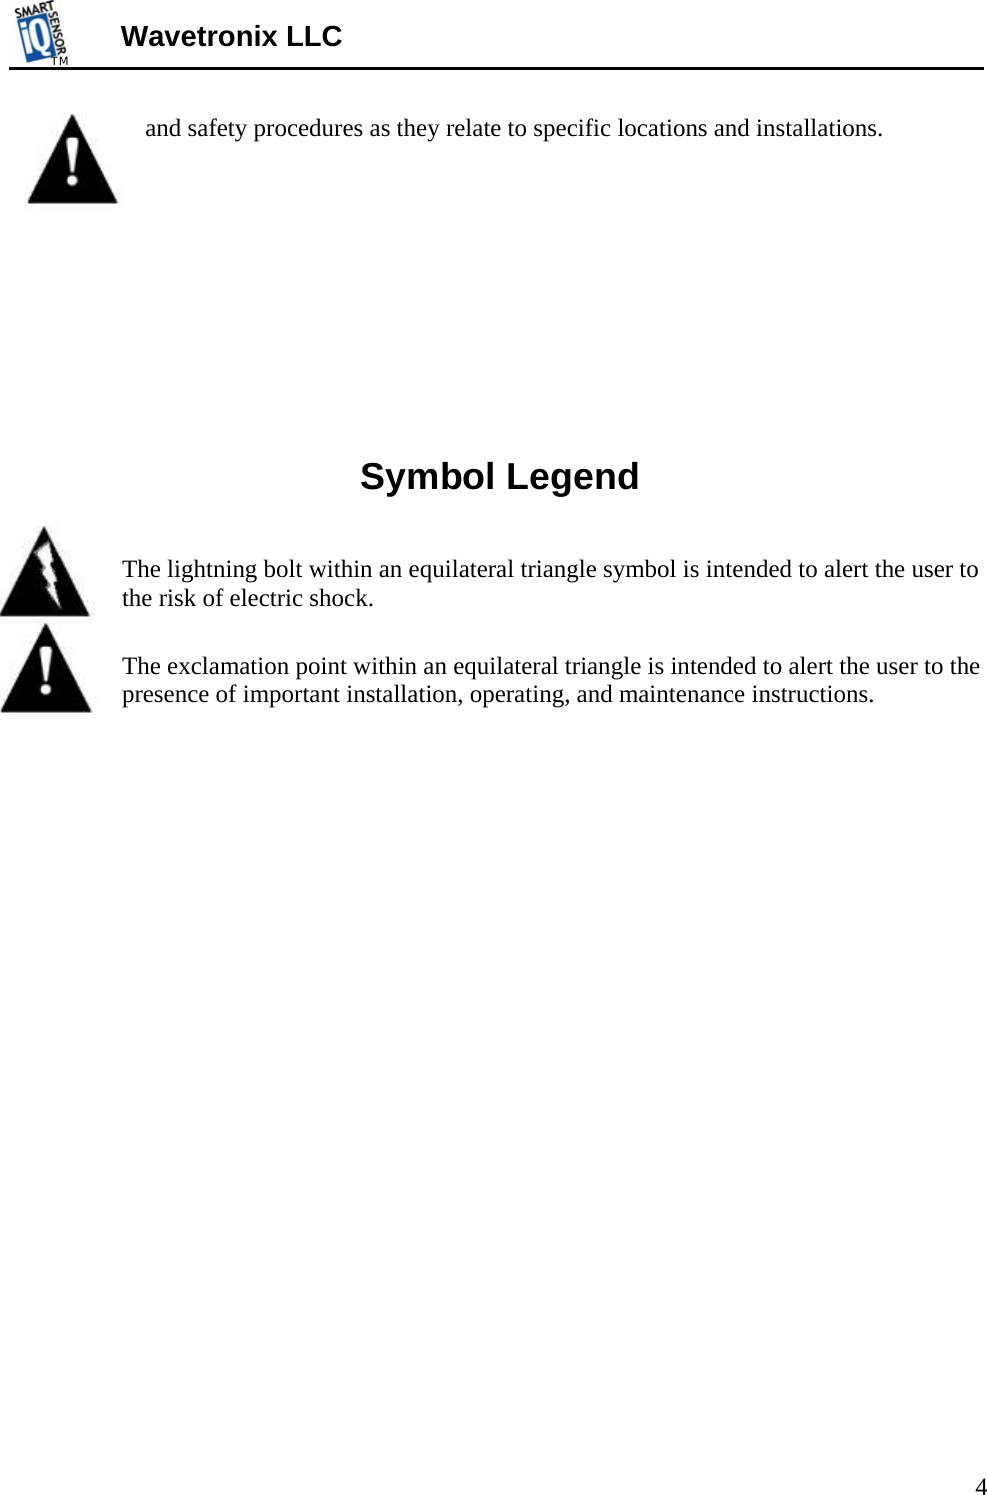 TMTM  Wavetronix LLC  and safety procedures as they relate to specific locations and installations.       Symbol Legend    The lightning bolt within an equilateral triangle symbol is intended to alert the user to the risk of electric shock.   The exclamation point within an equilateral triangle is intended to alert the user to the presence of important installation, operating, and maintenance instructions.   4 